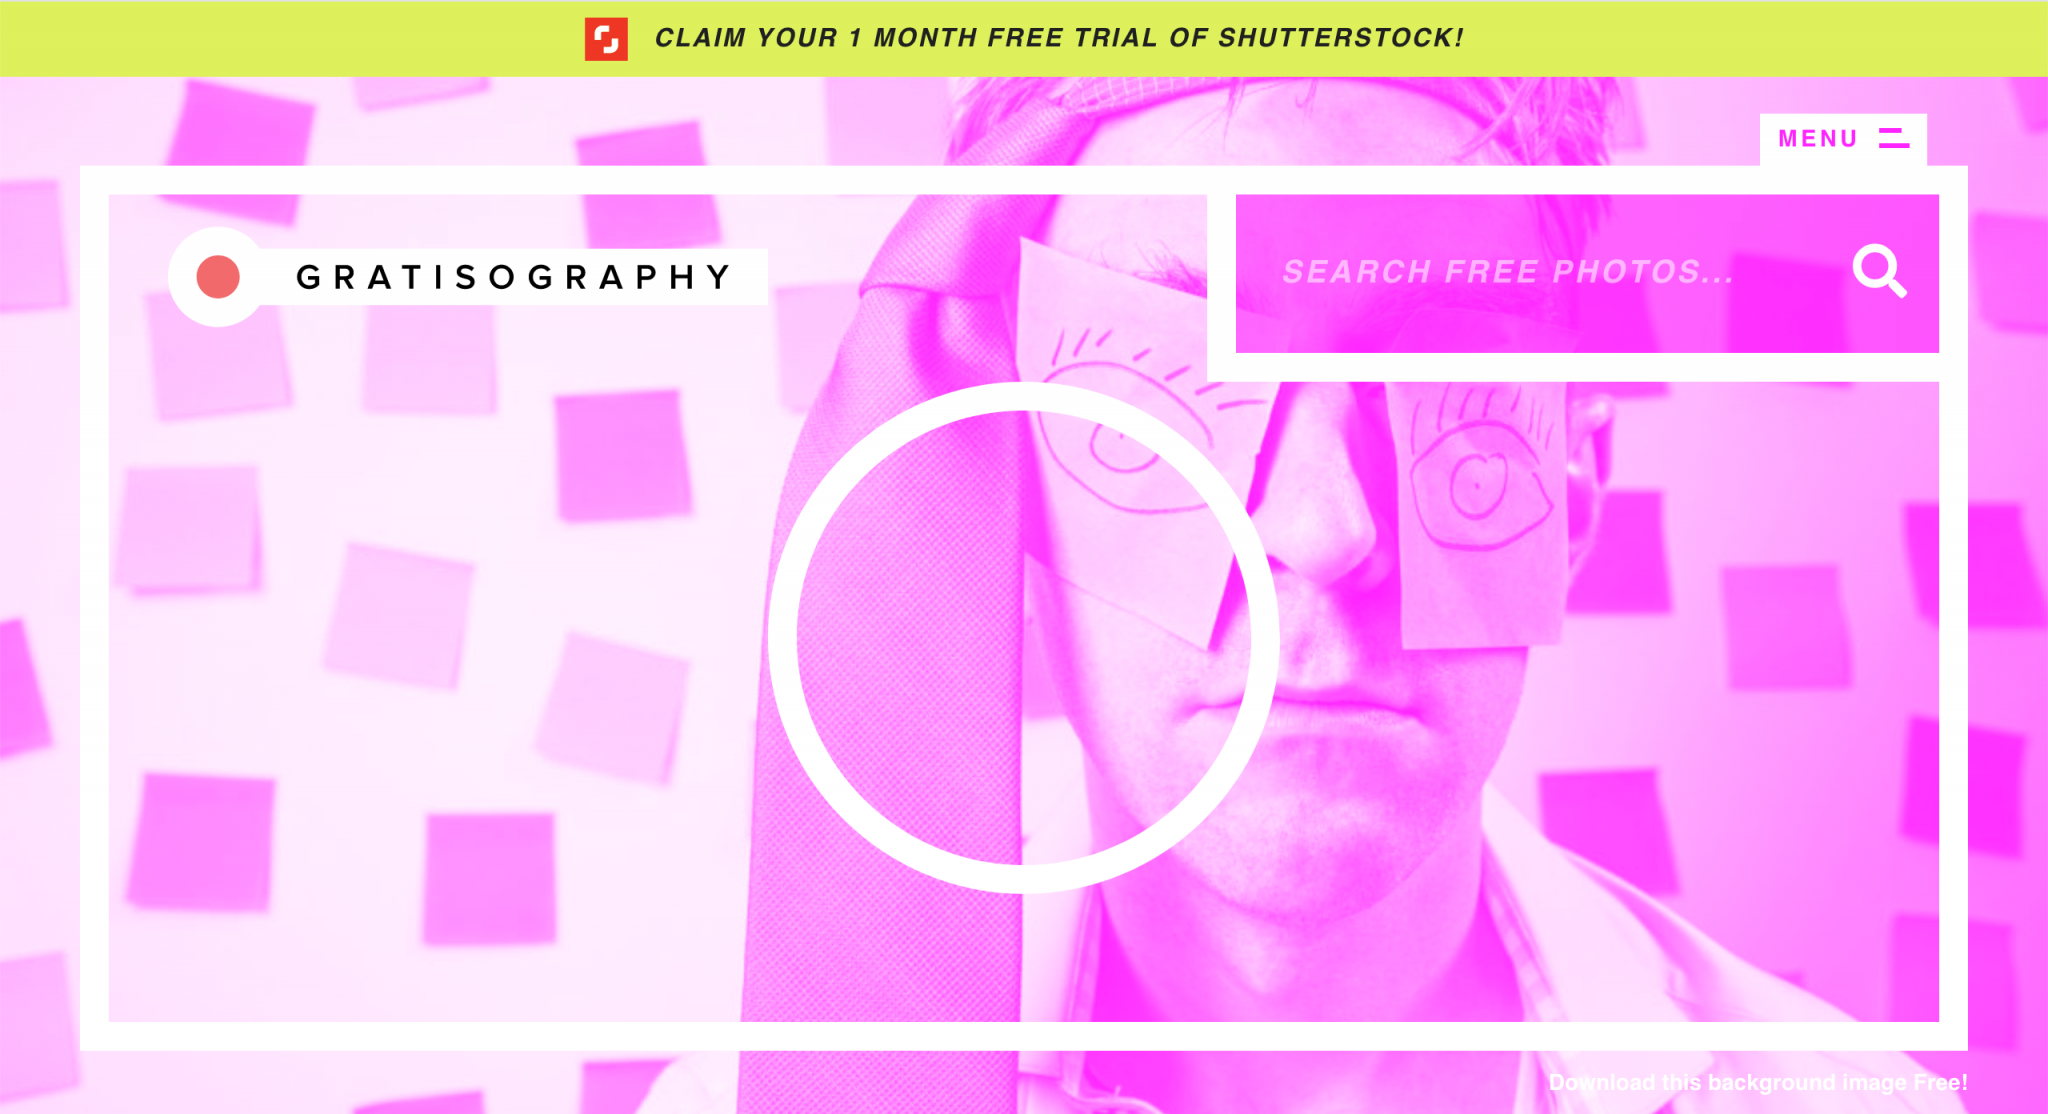 Gratisography website to find royalty free images for your blog posts.